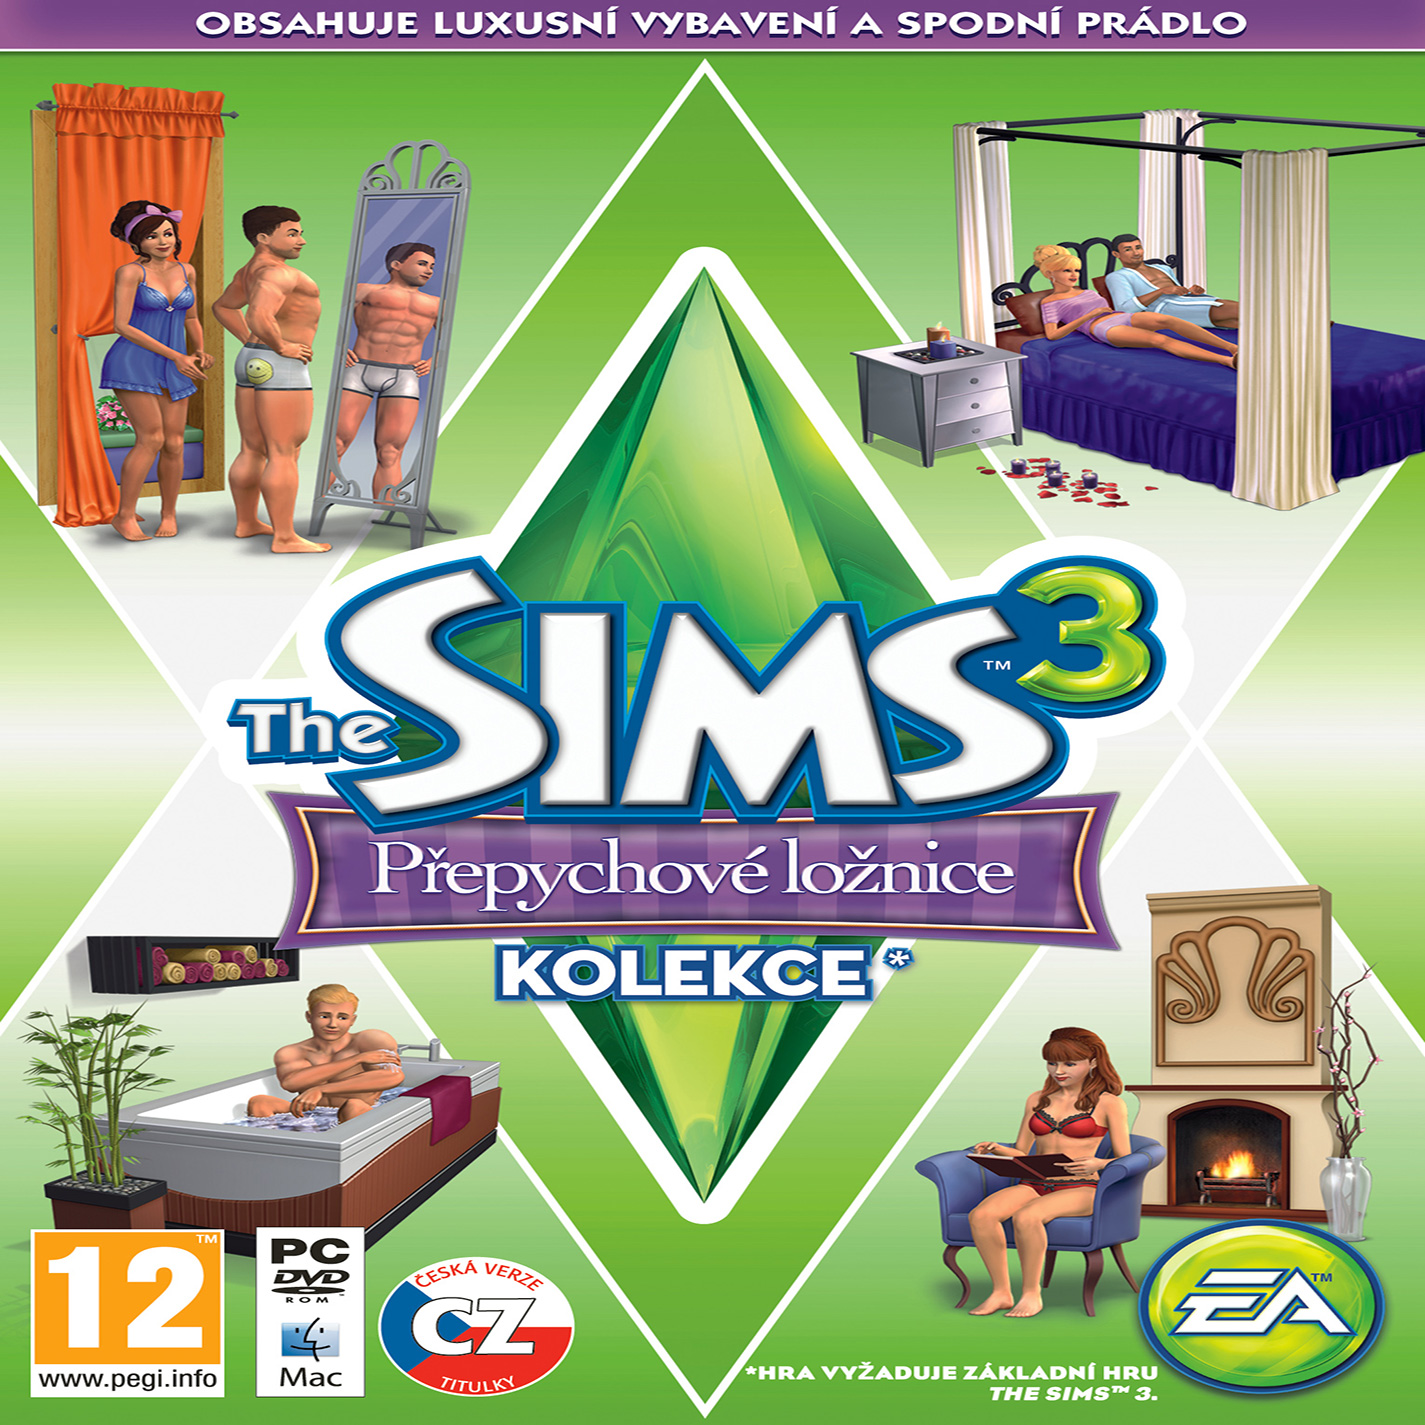 The Sims 3: Master Suite Stuff - pedn CD obal 2